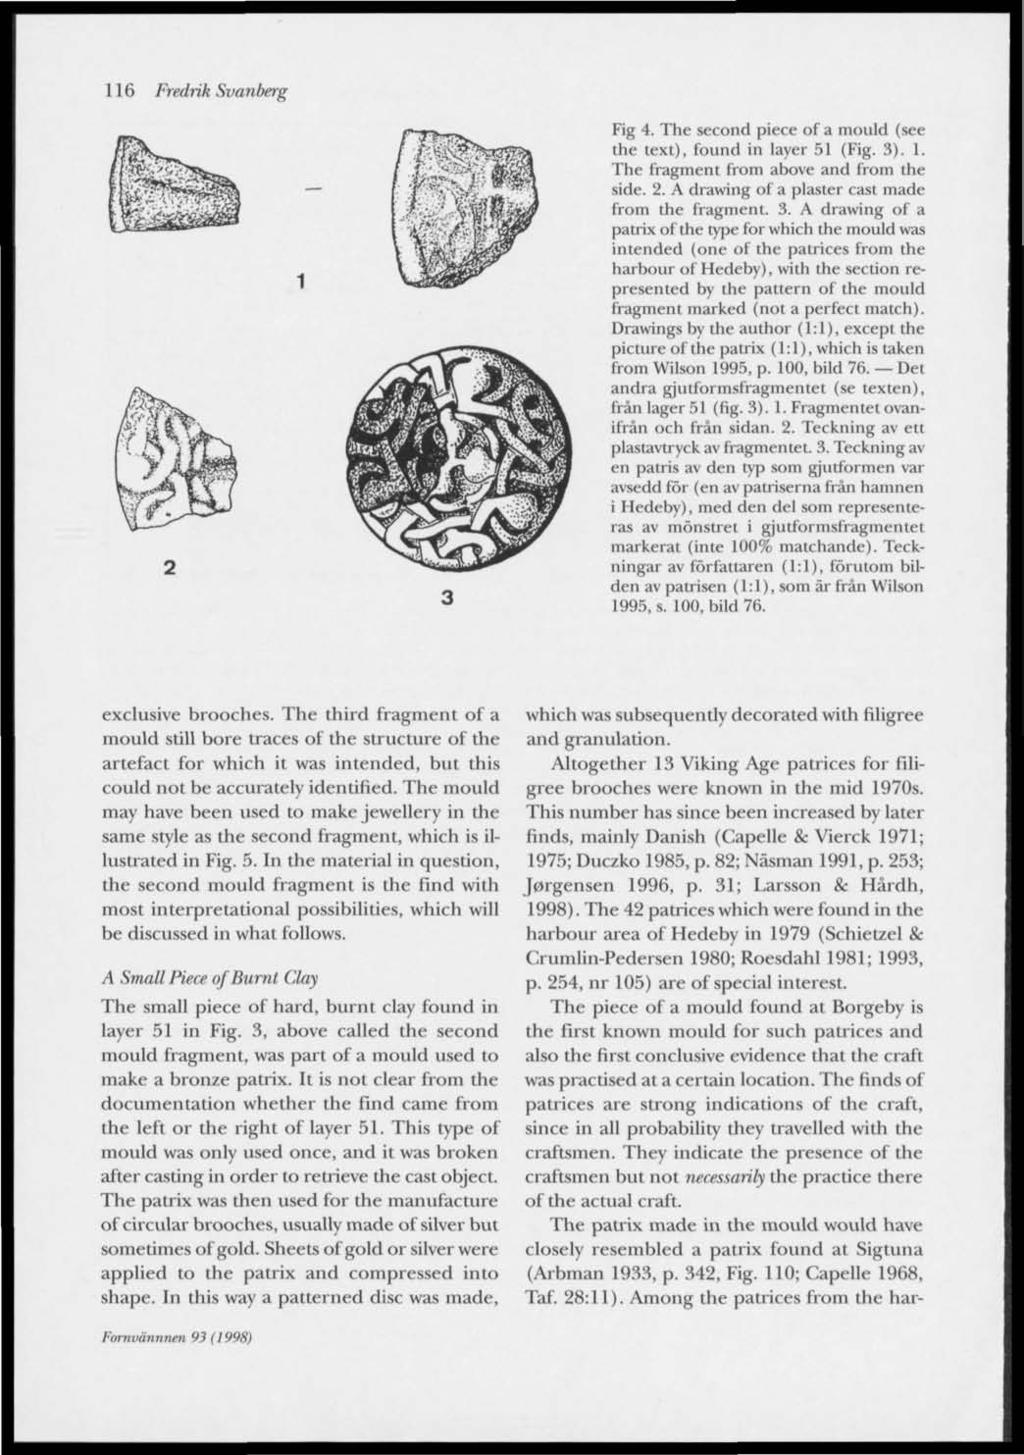 116 Fredrik Svanberg Fig 4. The second piece of a mould (see the text), found in layer 51 (Fig. 3). 1. The fragment from above and from the side. 2. A drawing of a plaster cast made from the fragment.